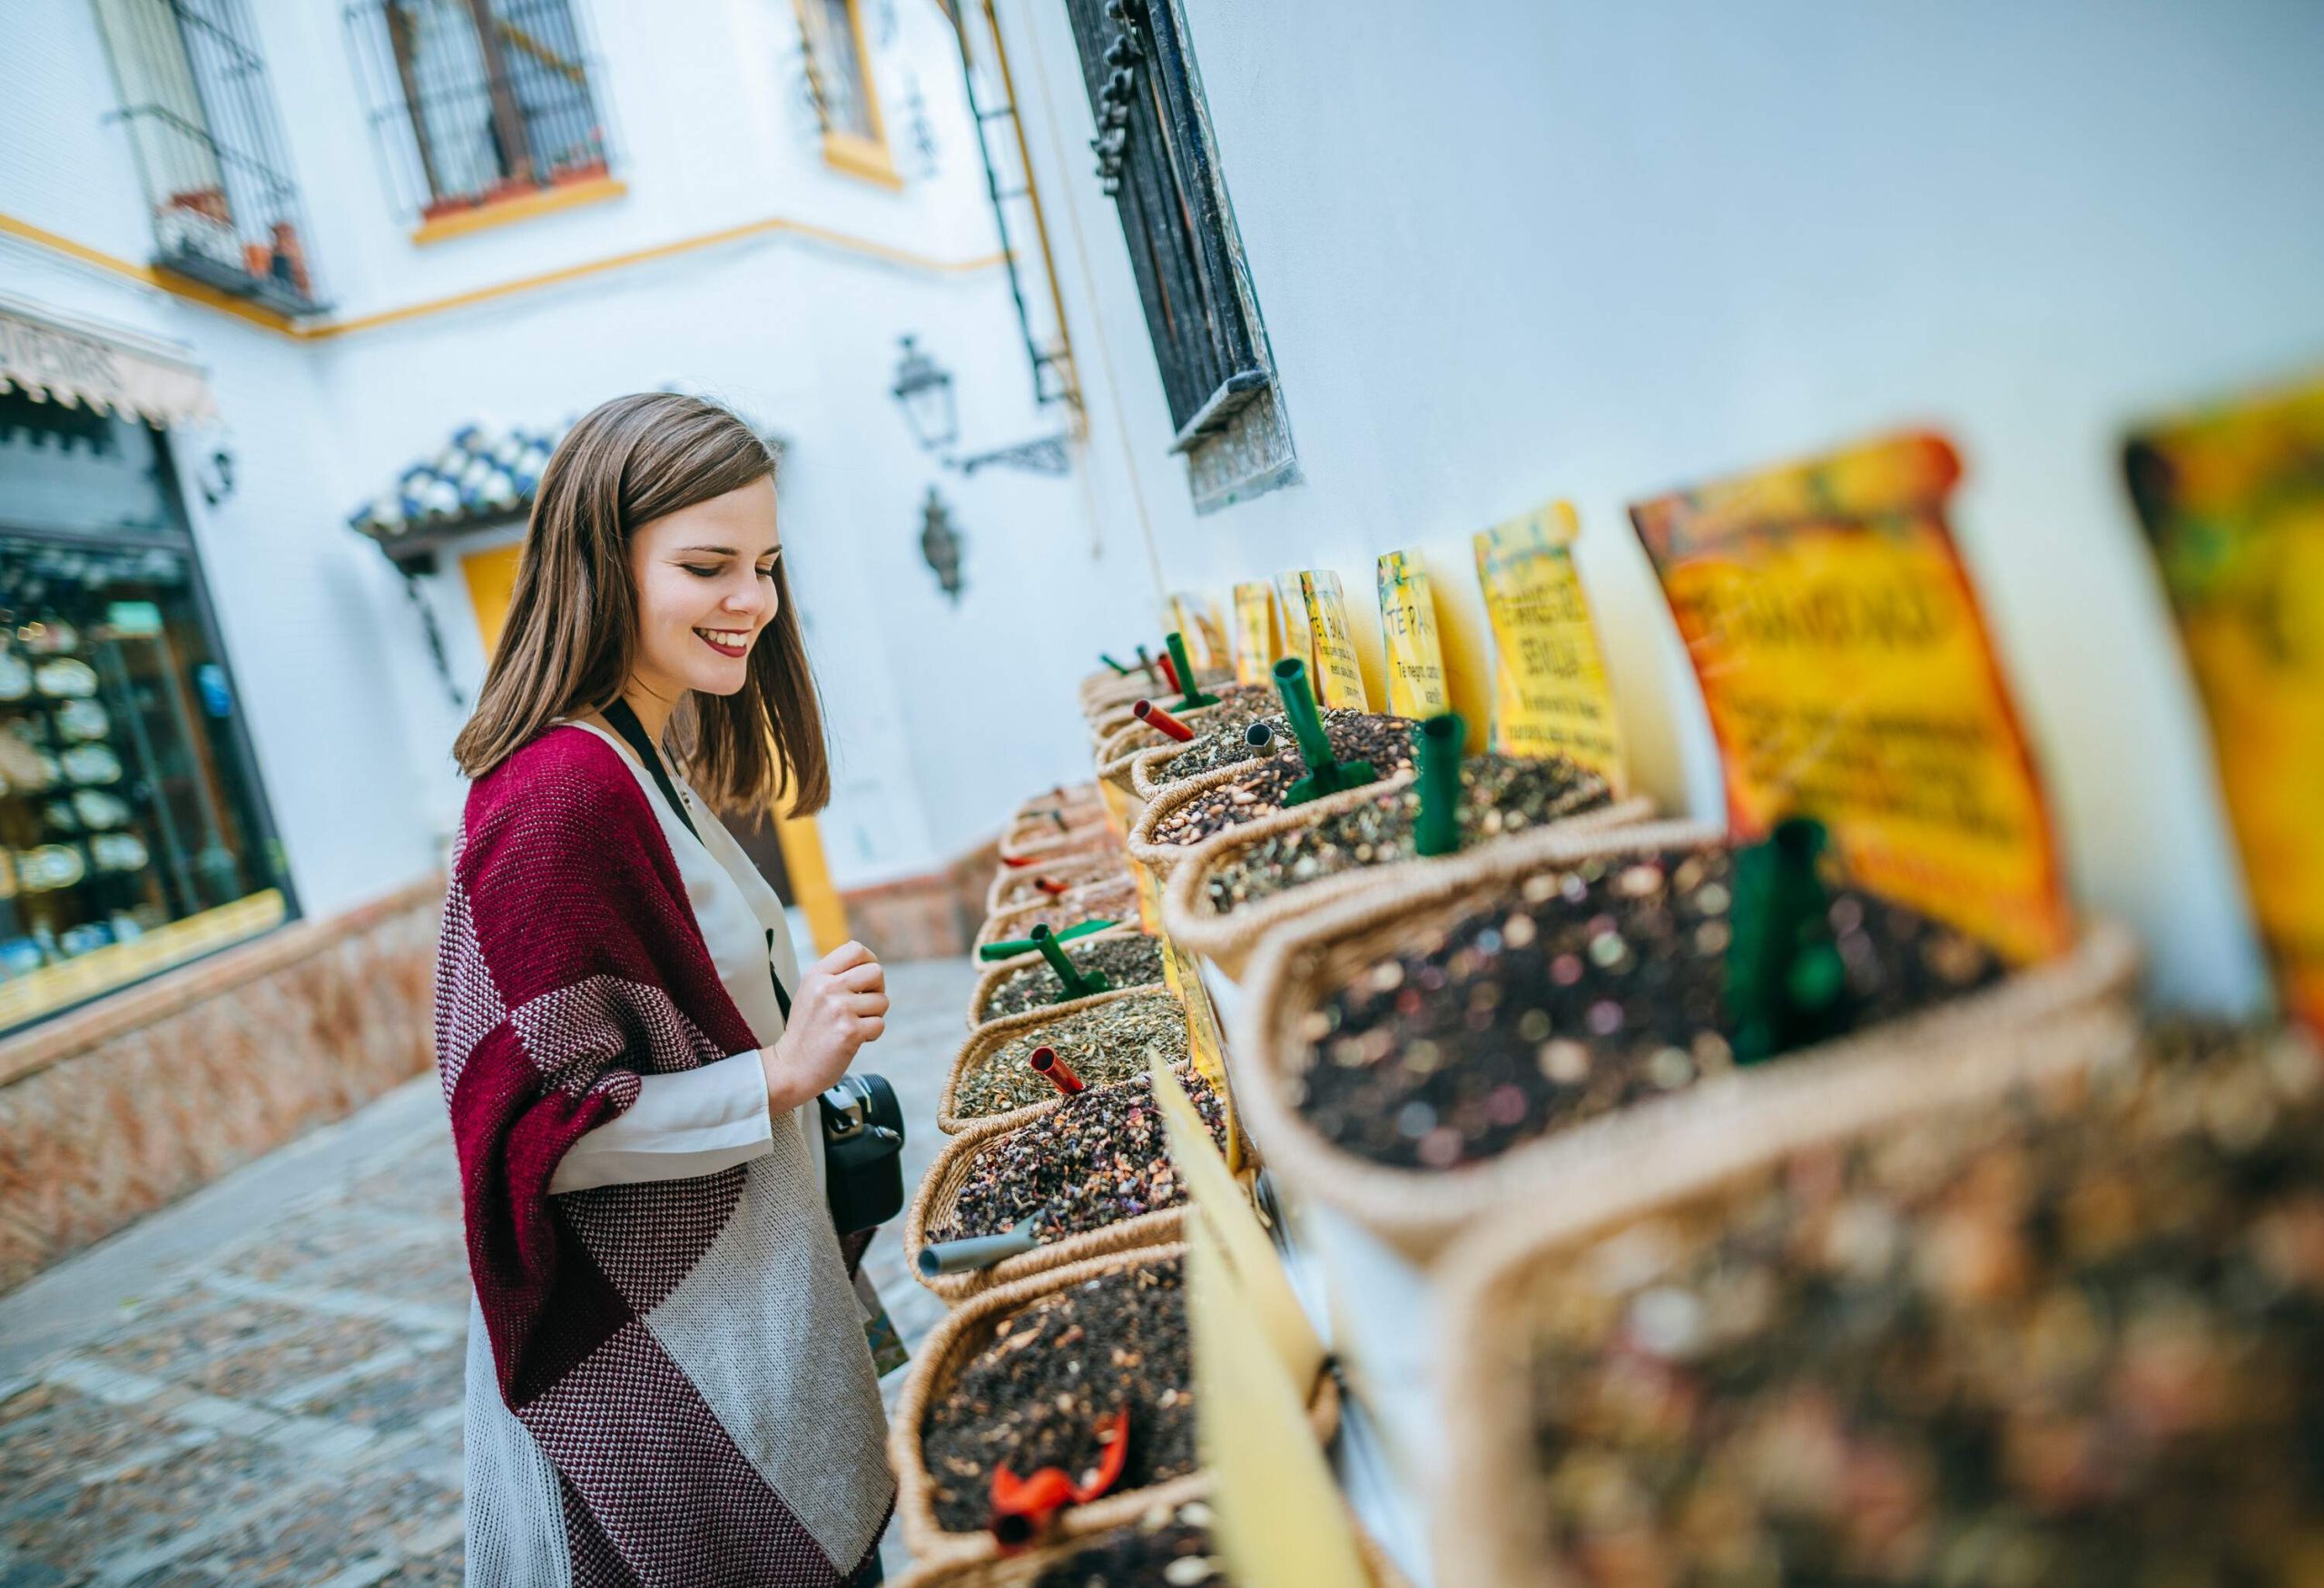 A smiling woman is about to decide what to buy in a spice shop.